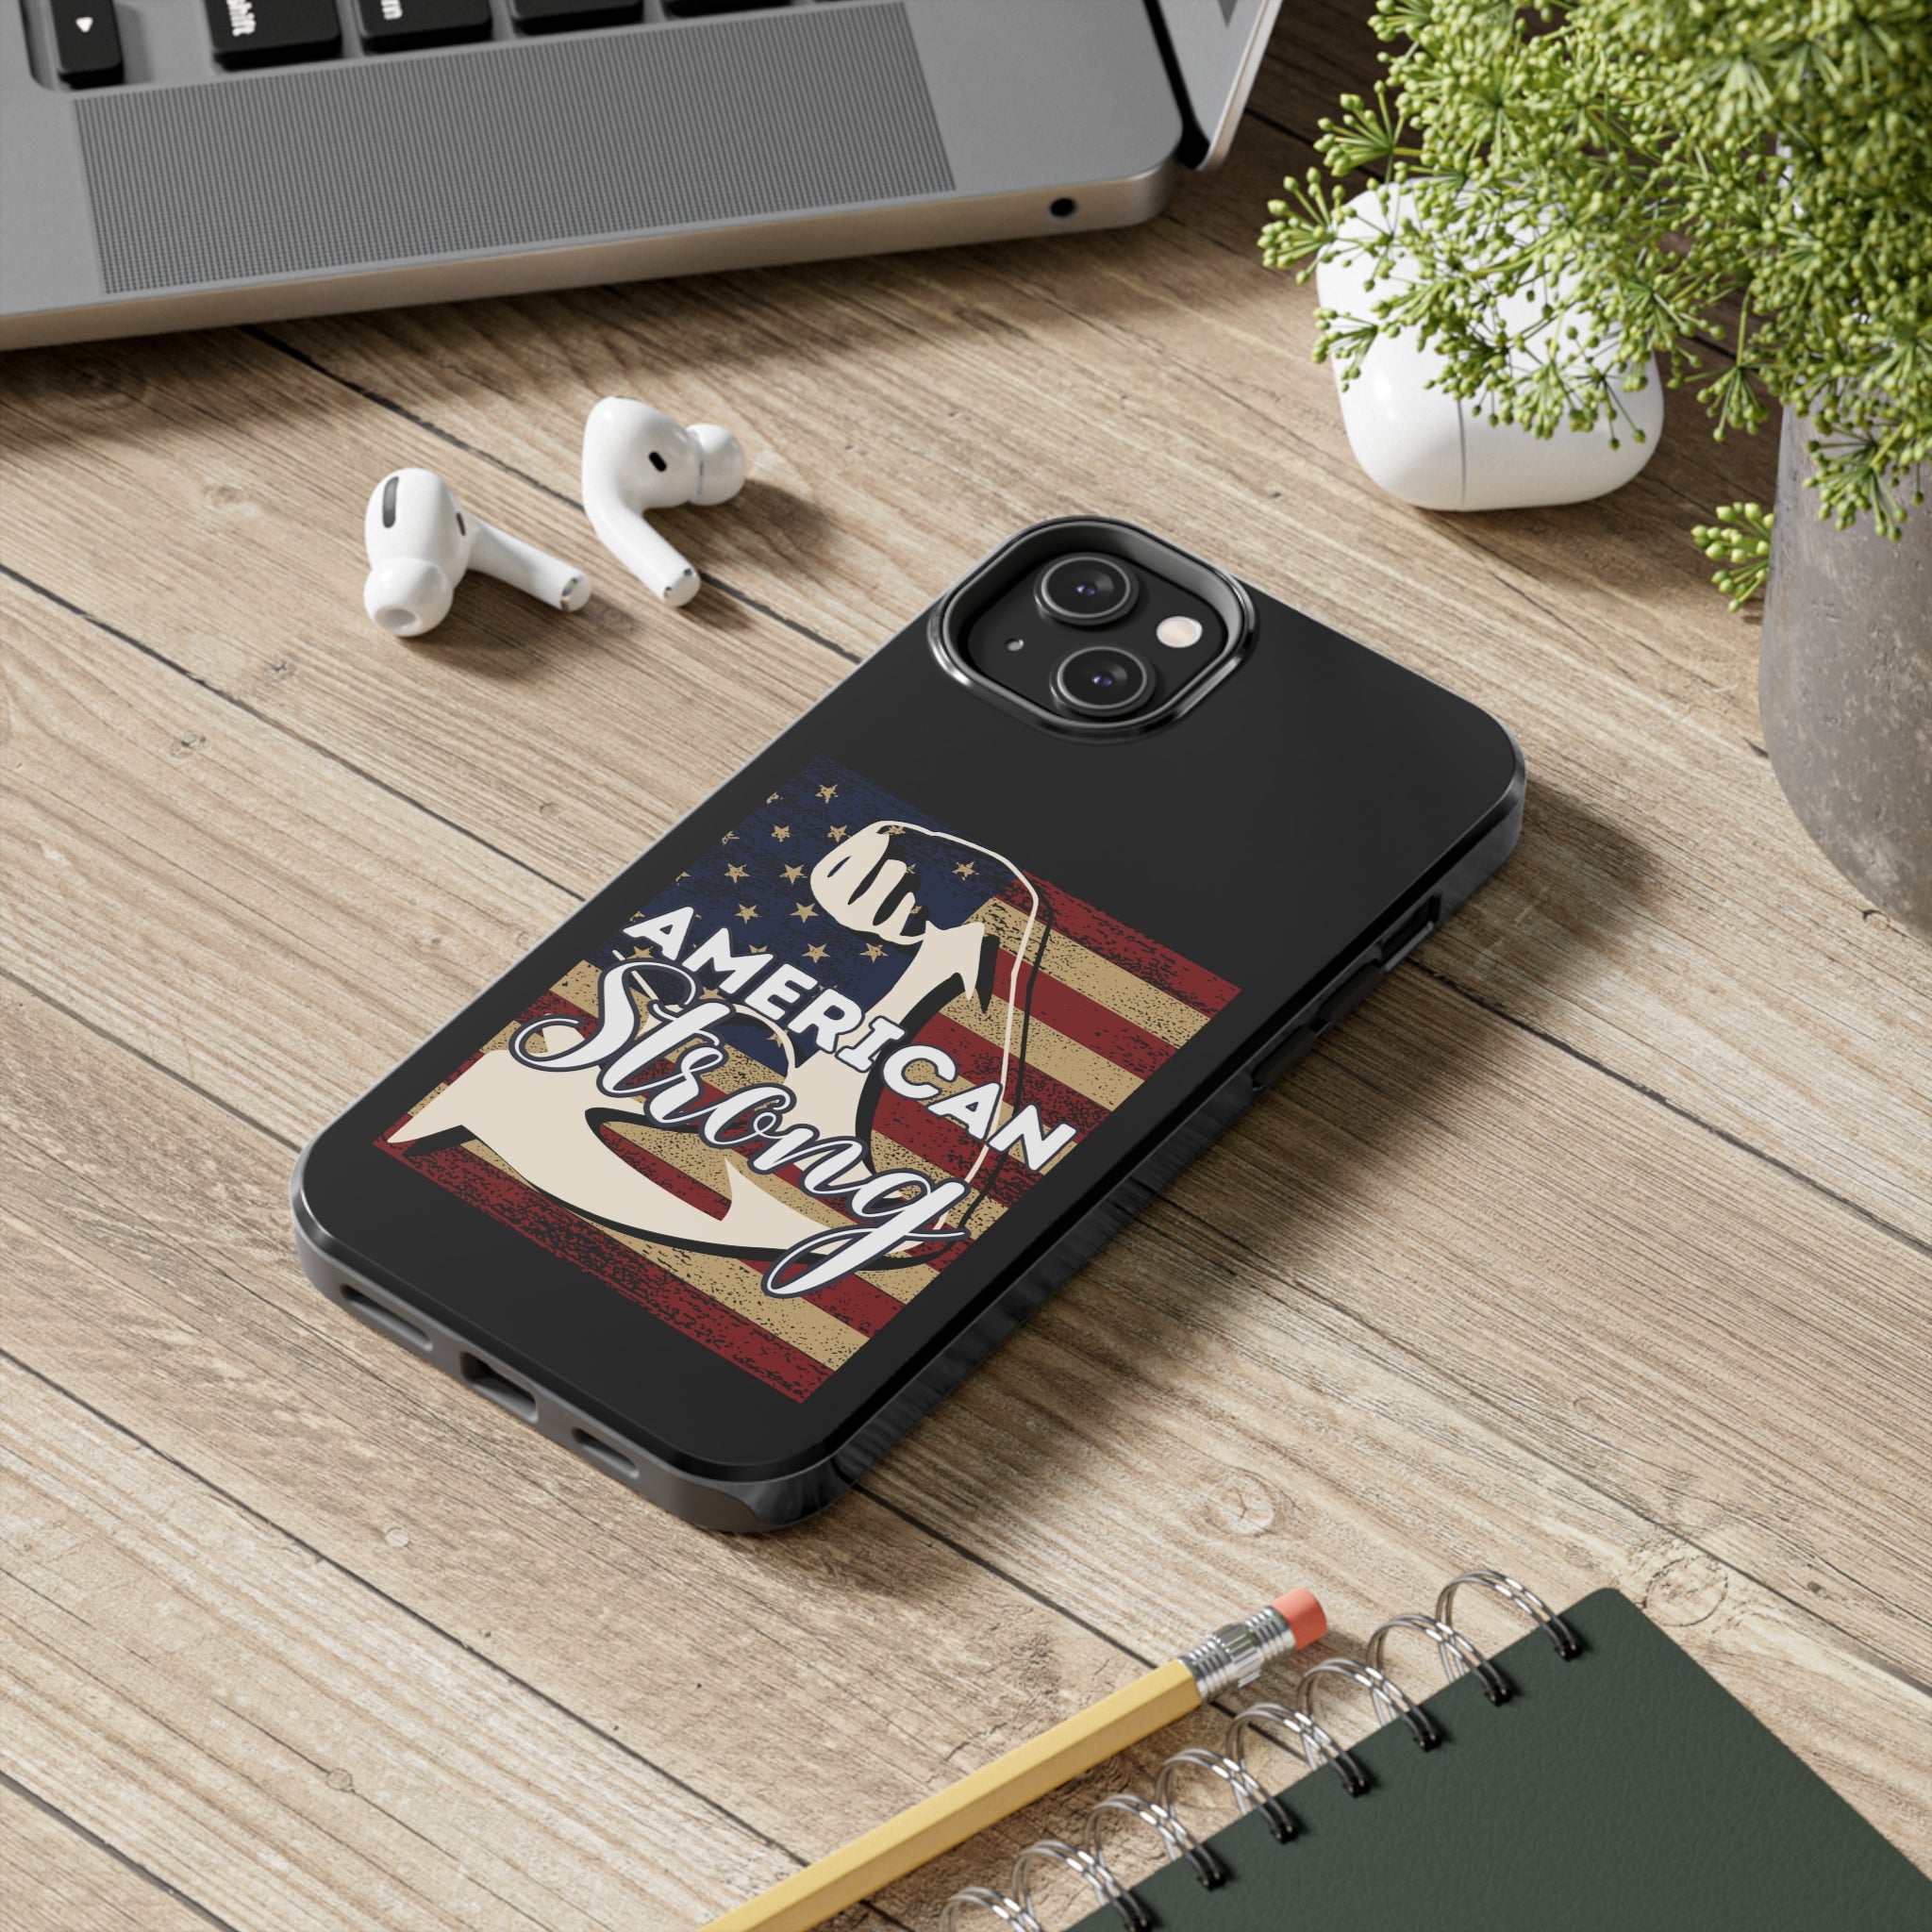 American Strong - iPhone Tough Cases